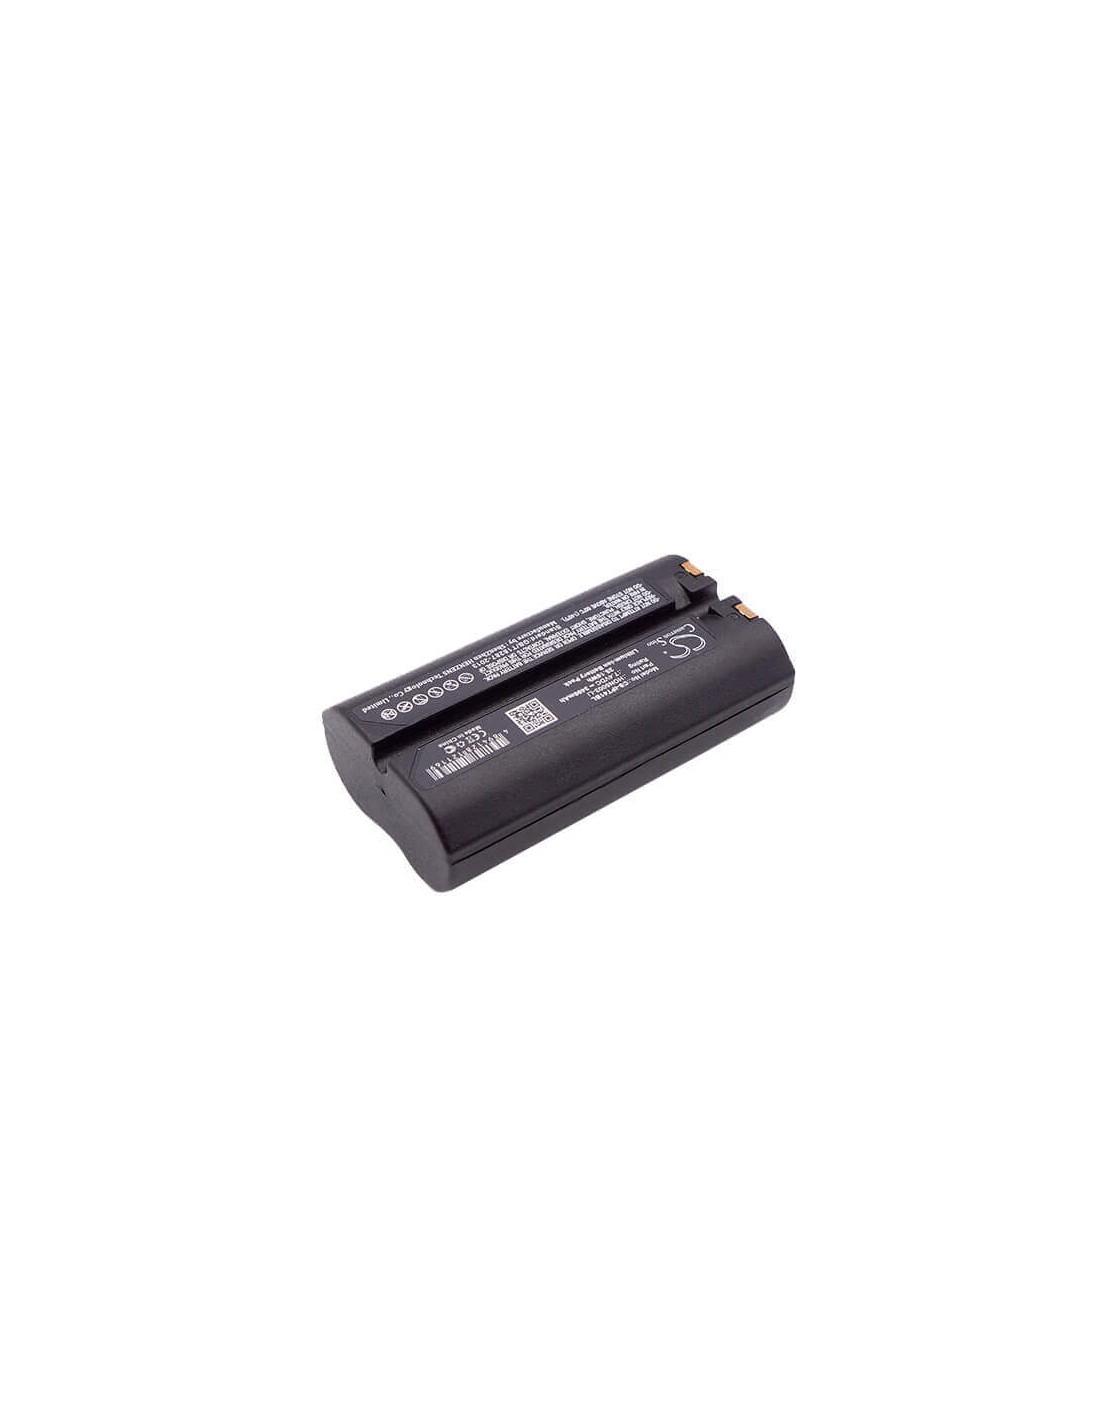 Battery for Oneil, Microflash 4i, Microflash 4t, Microflash 4t Printer 7.4V, 3400mAh - 25.16Wh